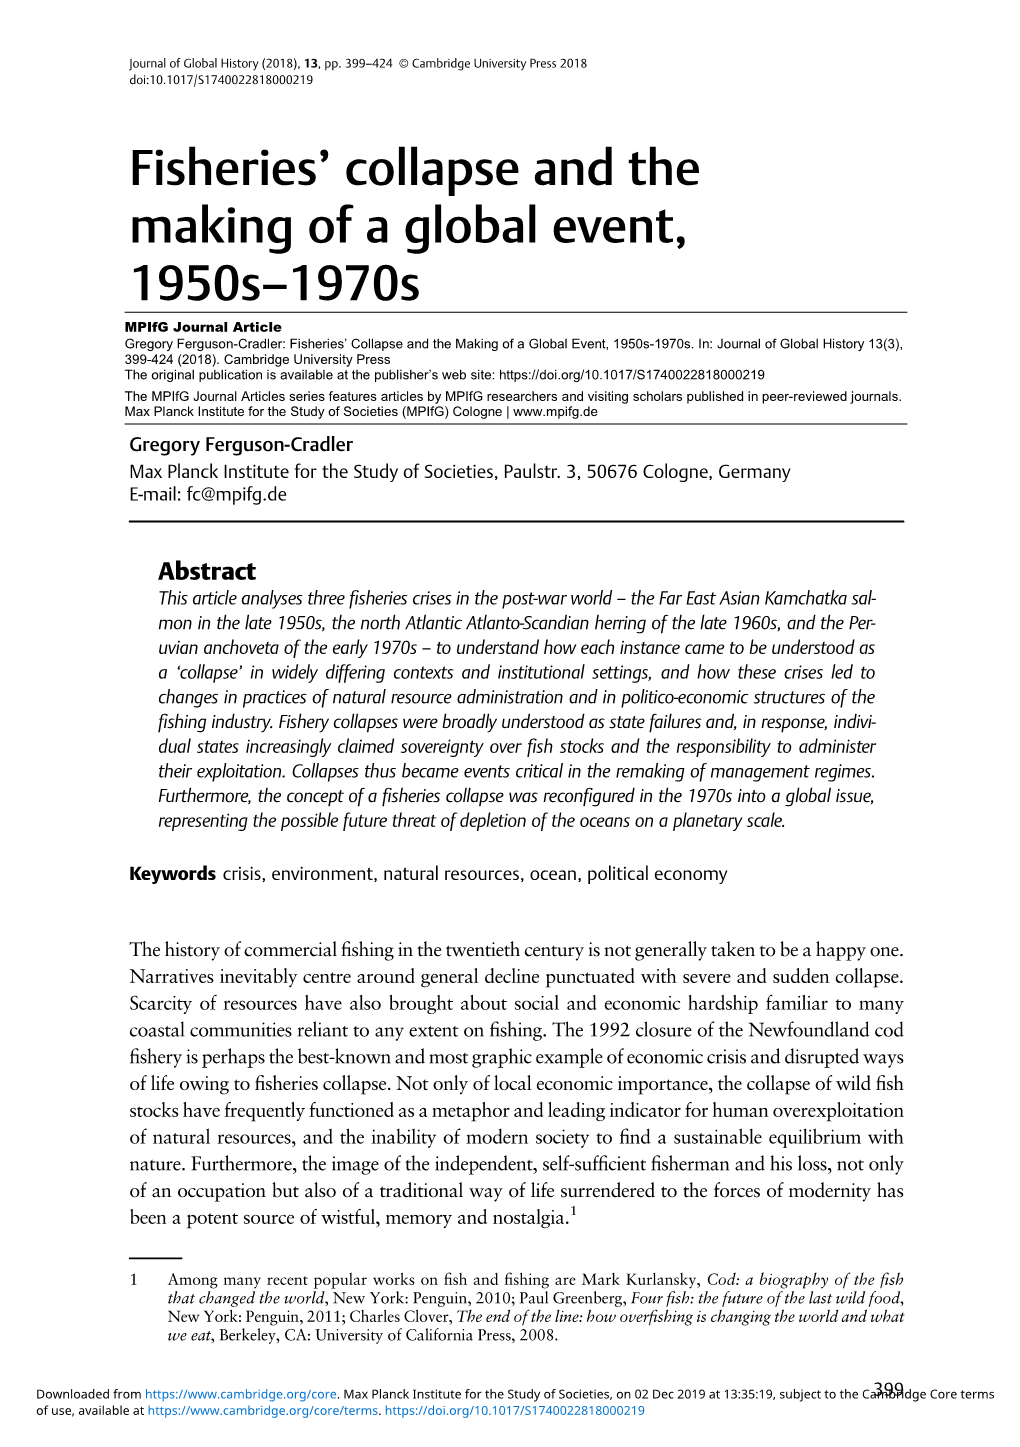 Fisheries' Collapse and the Making of a Global Event, 1950S–1970S